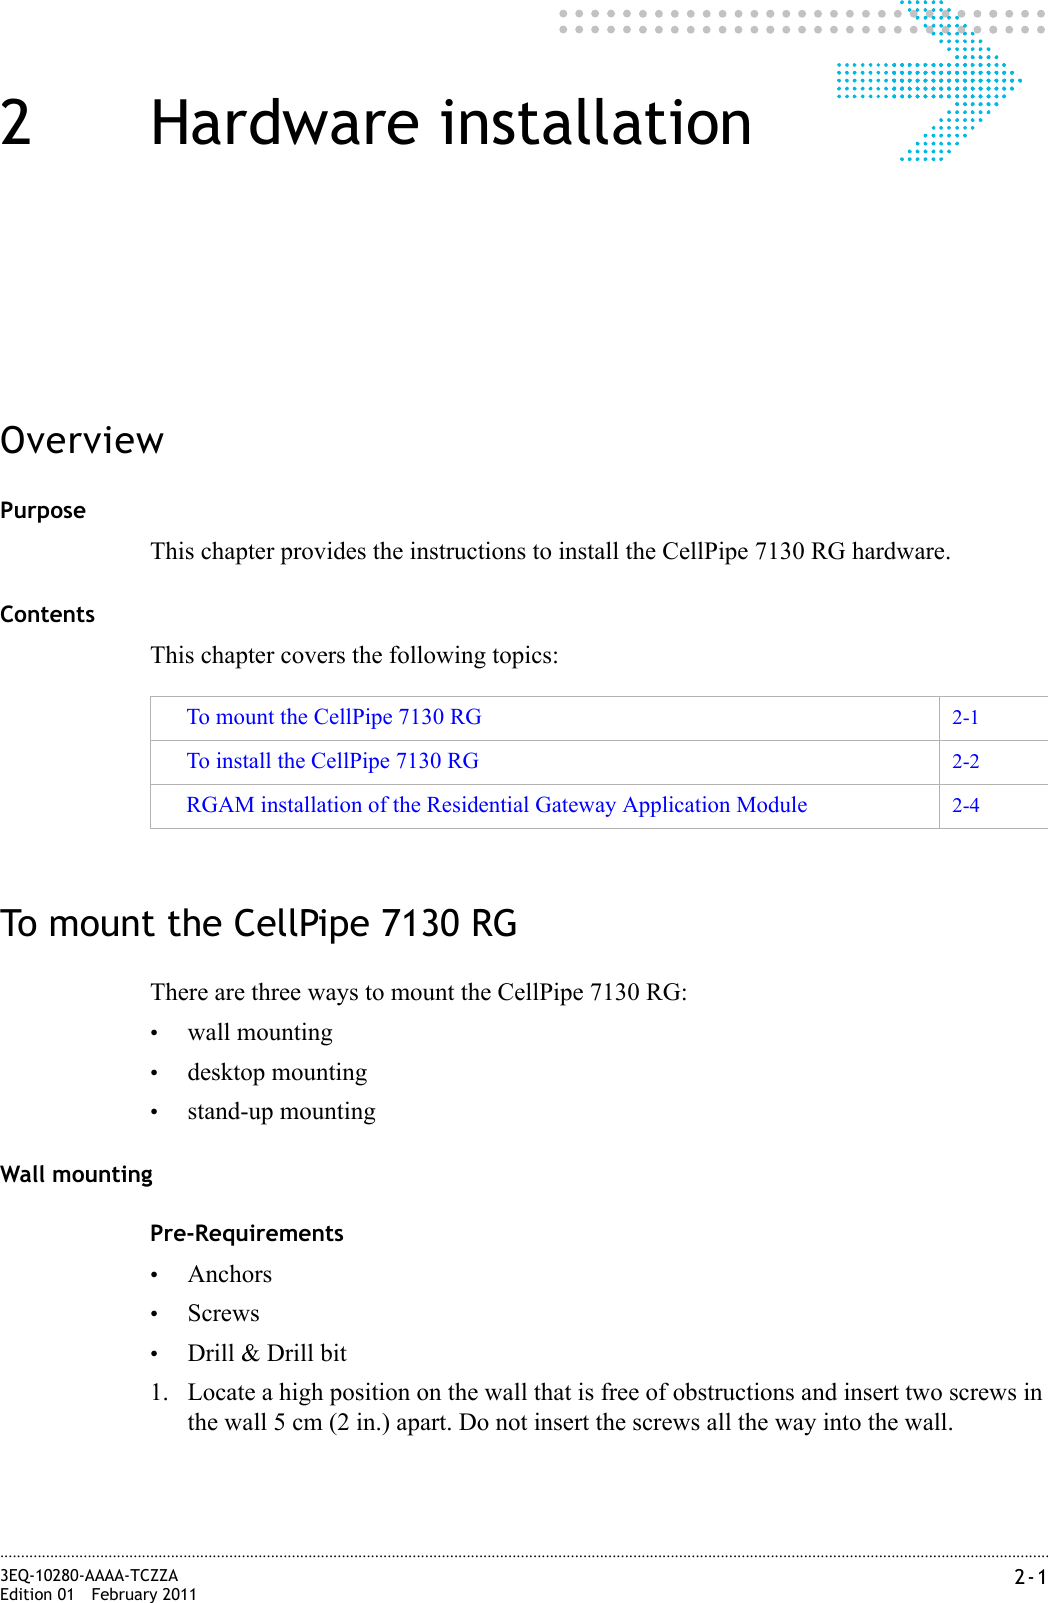 2-13EQ-10280-AAAA-TCZZAEdition 01 February 2011............................................................................................................................................................................................................................................................2 Hardware installationOverviewPurposeThis chapter provides the instructions to install the CellPipe 7130 RG hardware.ContentsThis chapter covers the following topics:To mount the CellPipe 7130 RGThere are three ways to mount the CellPipe 7130 RG:•wall mounting•desktop mounting•stand-up mountingWall mountingPre-Requirements•Anchors•Screws•Drill &amp; Drill bit1. Locate a high position on the wall that is free of obstructions and insert two screws in the wall 5 cm (2 in.) apart. Do not insert the screws all the way into the wall.To mount the CellPipe 7130 RG 2-1To install the CellPipe 7130 RG 2-2RGAM installation of the Residential Gateway Application Module 2-4